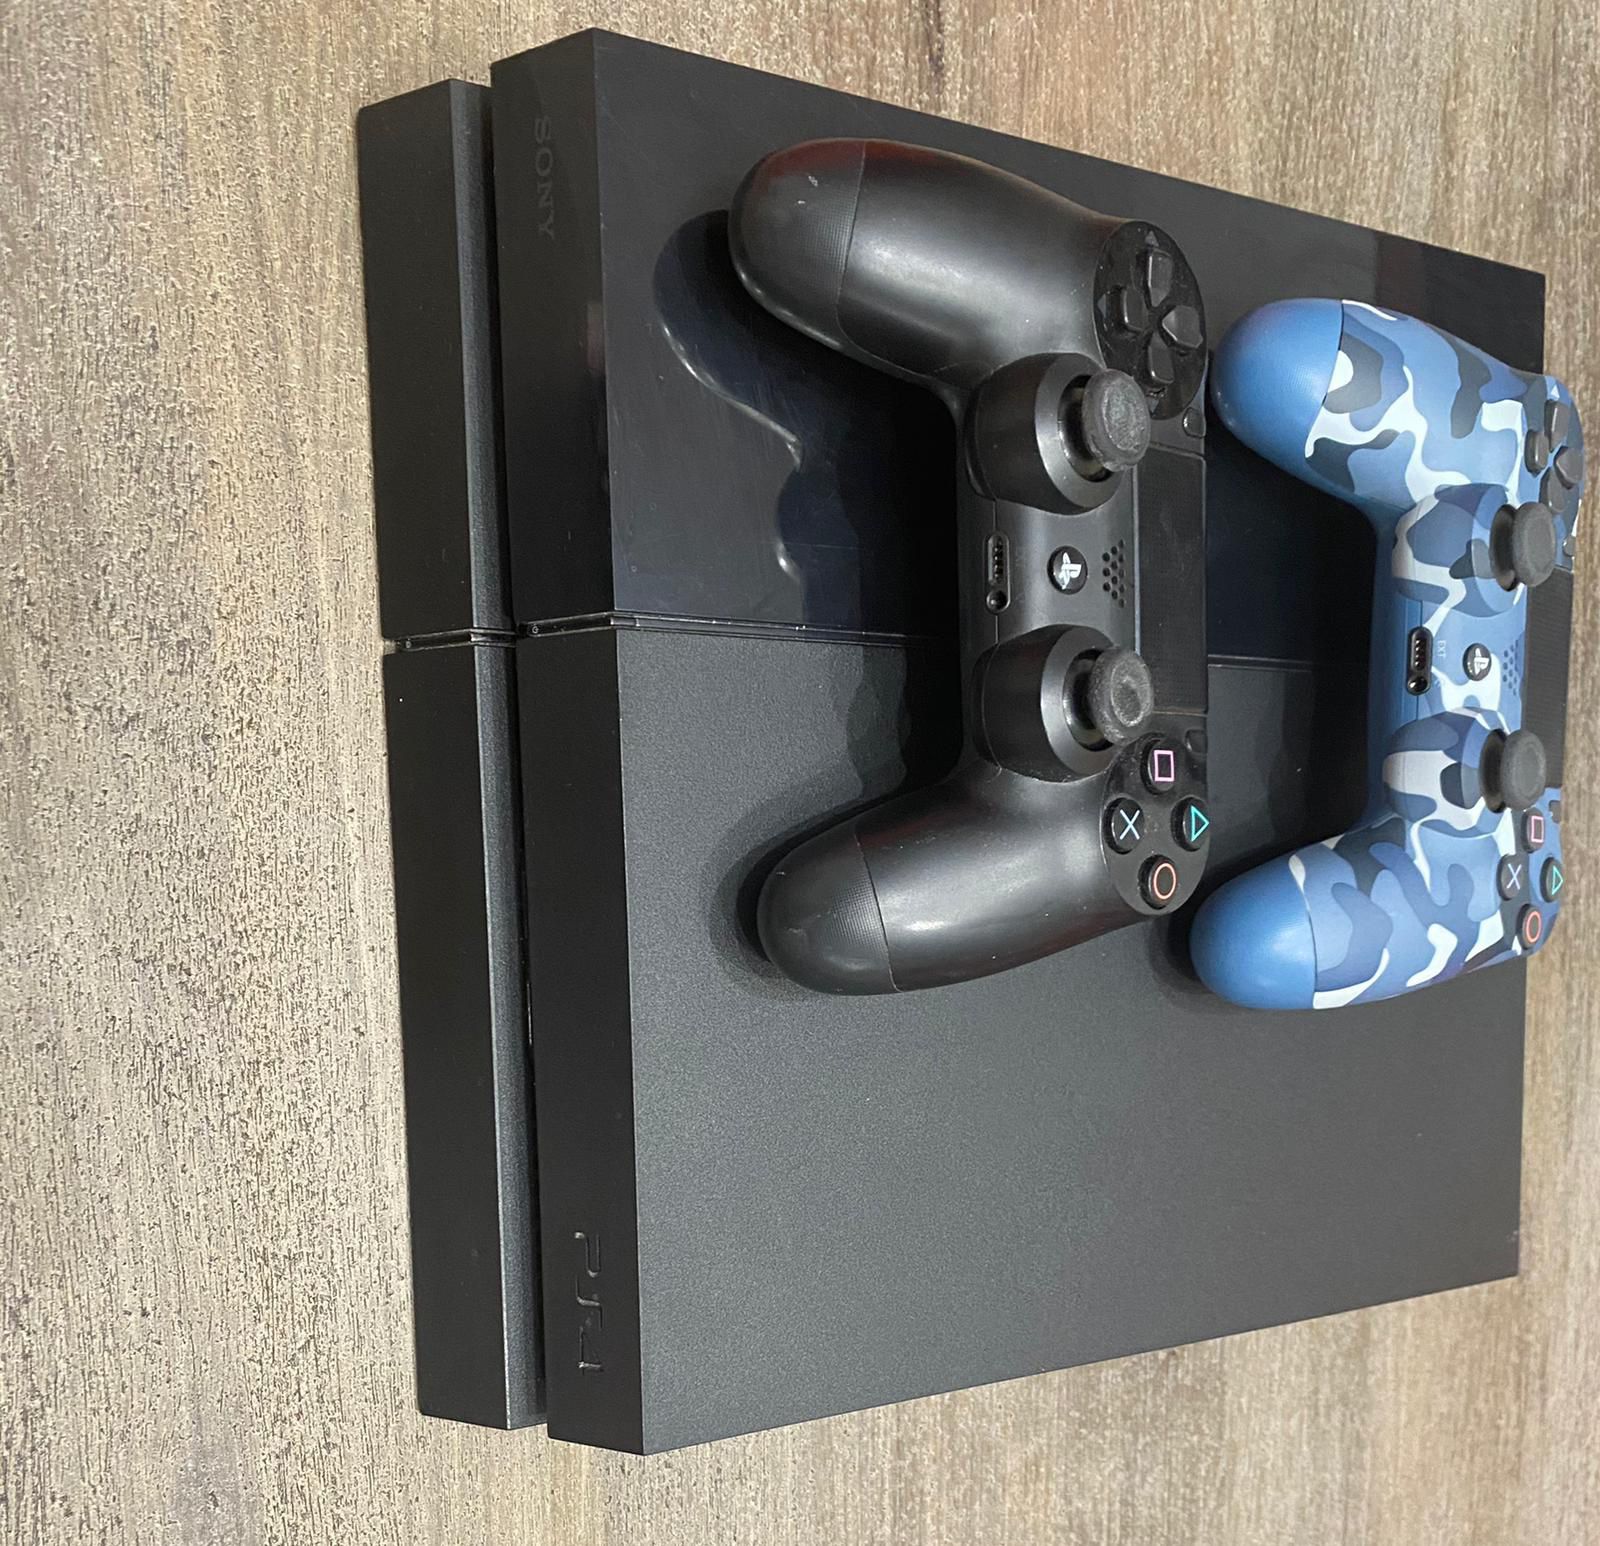 Used PS4 500GB 2 Controllers, 4 Games *can Negotiate Price*